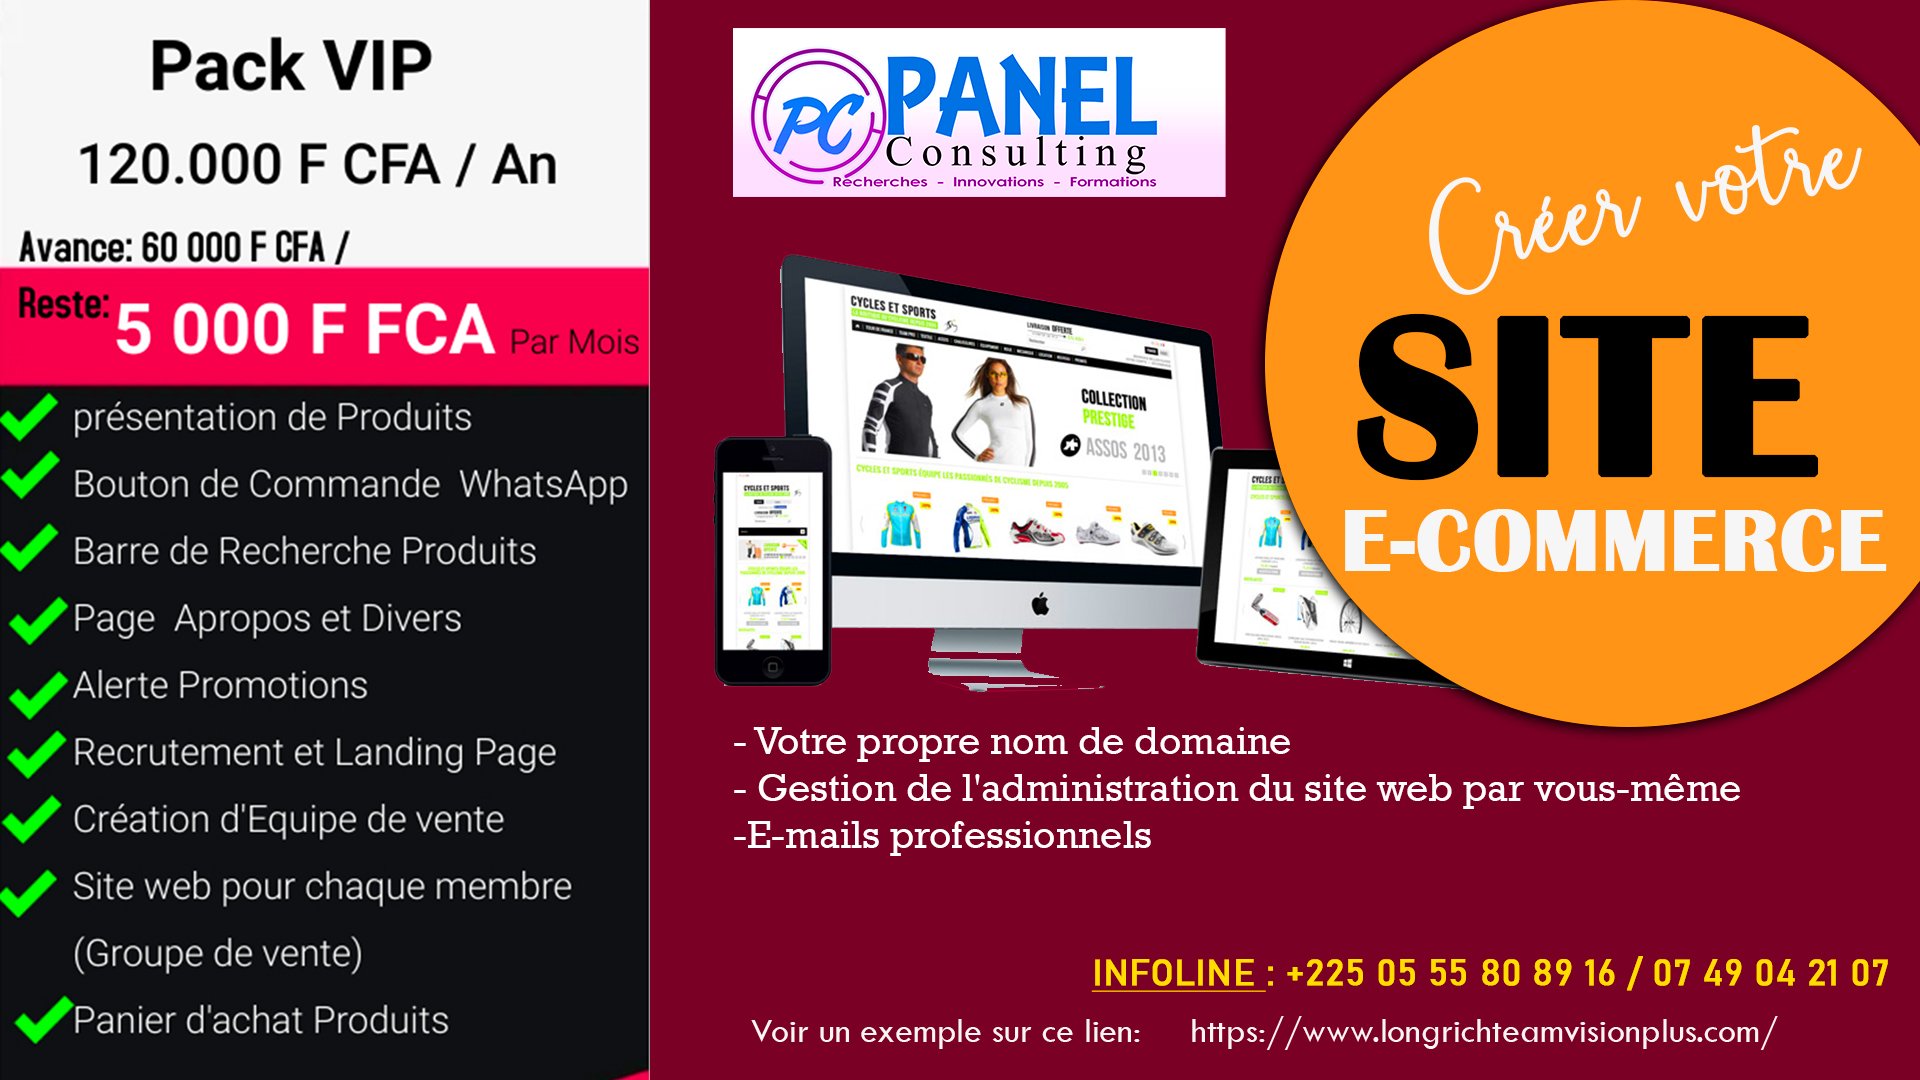 ceration-boutique-en-ligne-pack VIP-panel-consulting.jpg - panel consulting